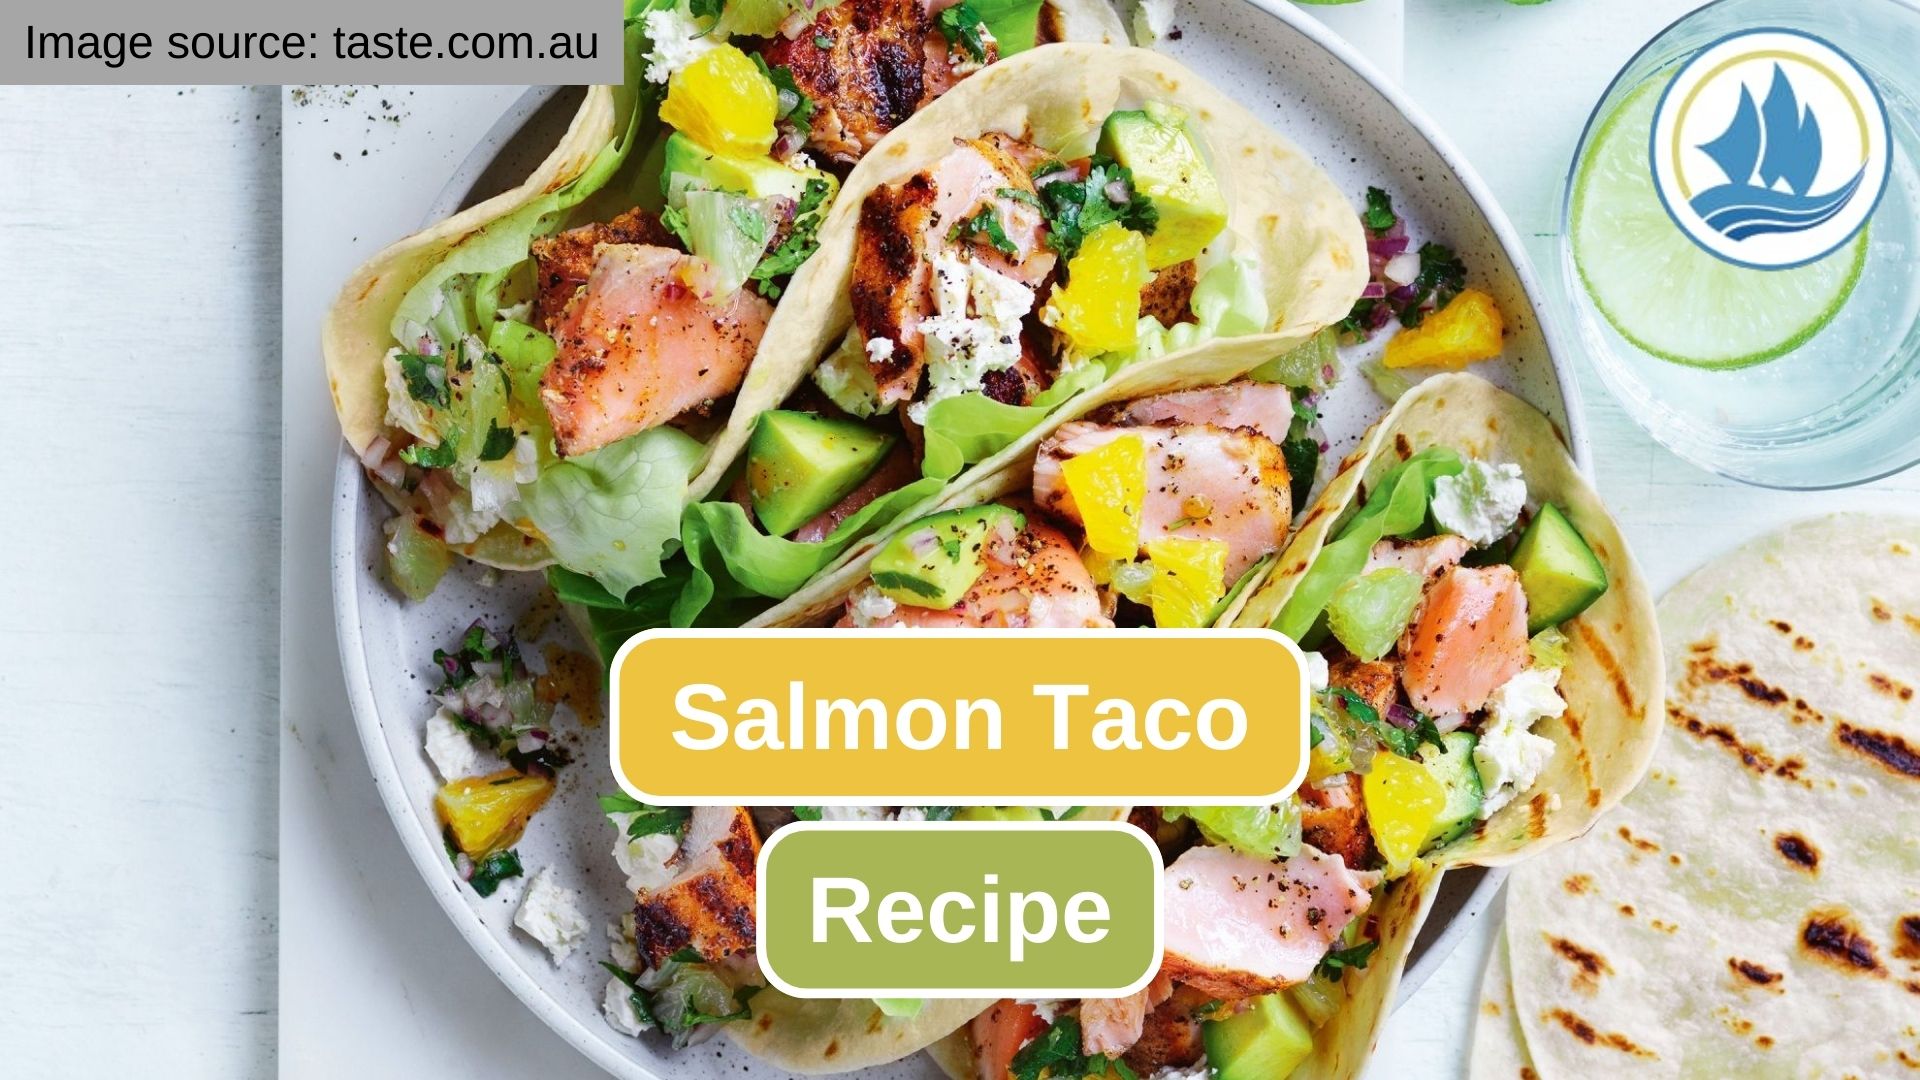 Try This Easy Salmon Taco Recipe at Home